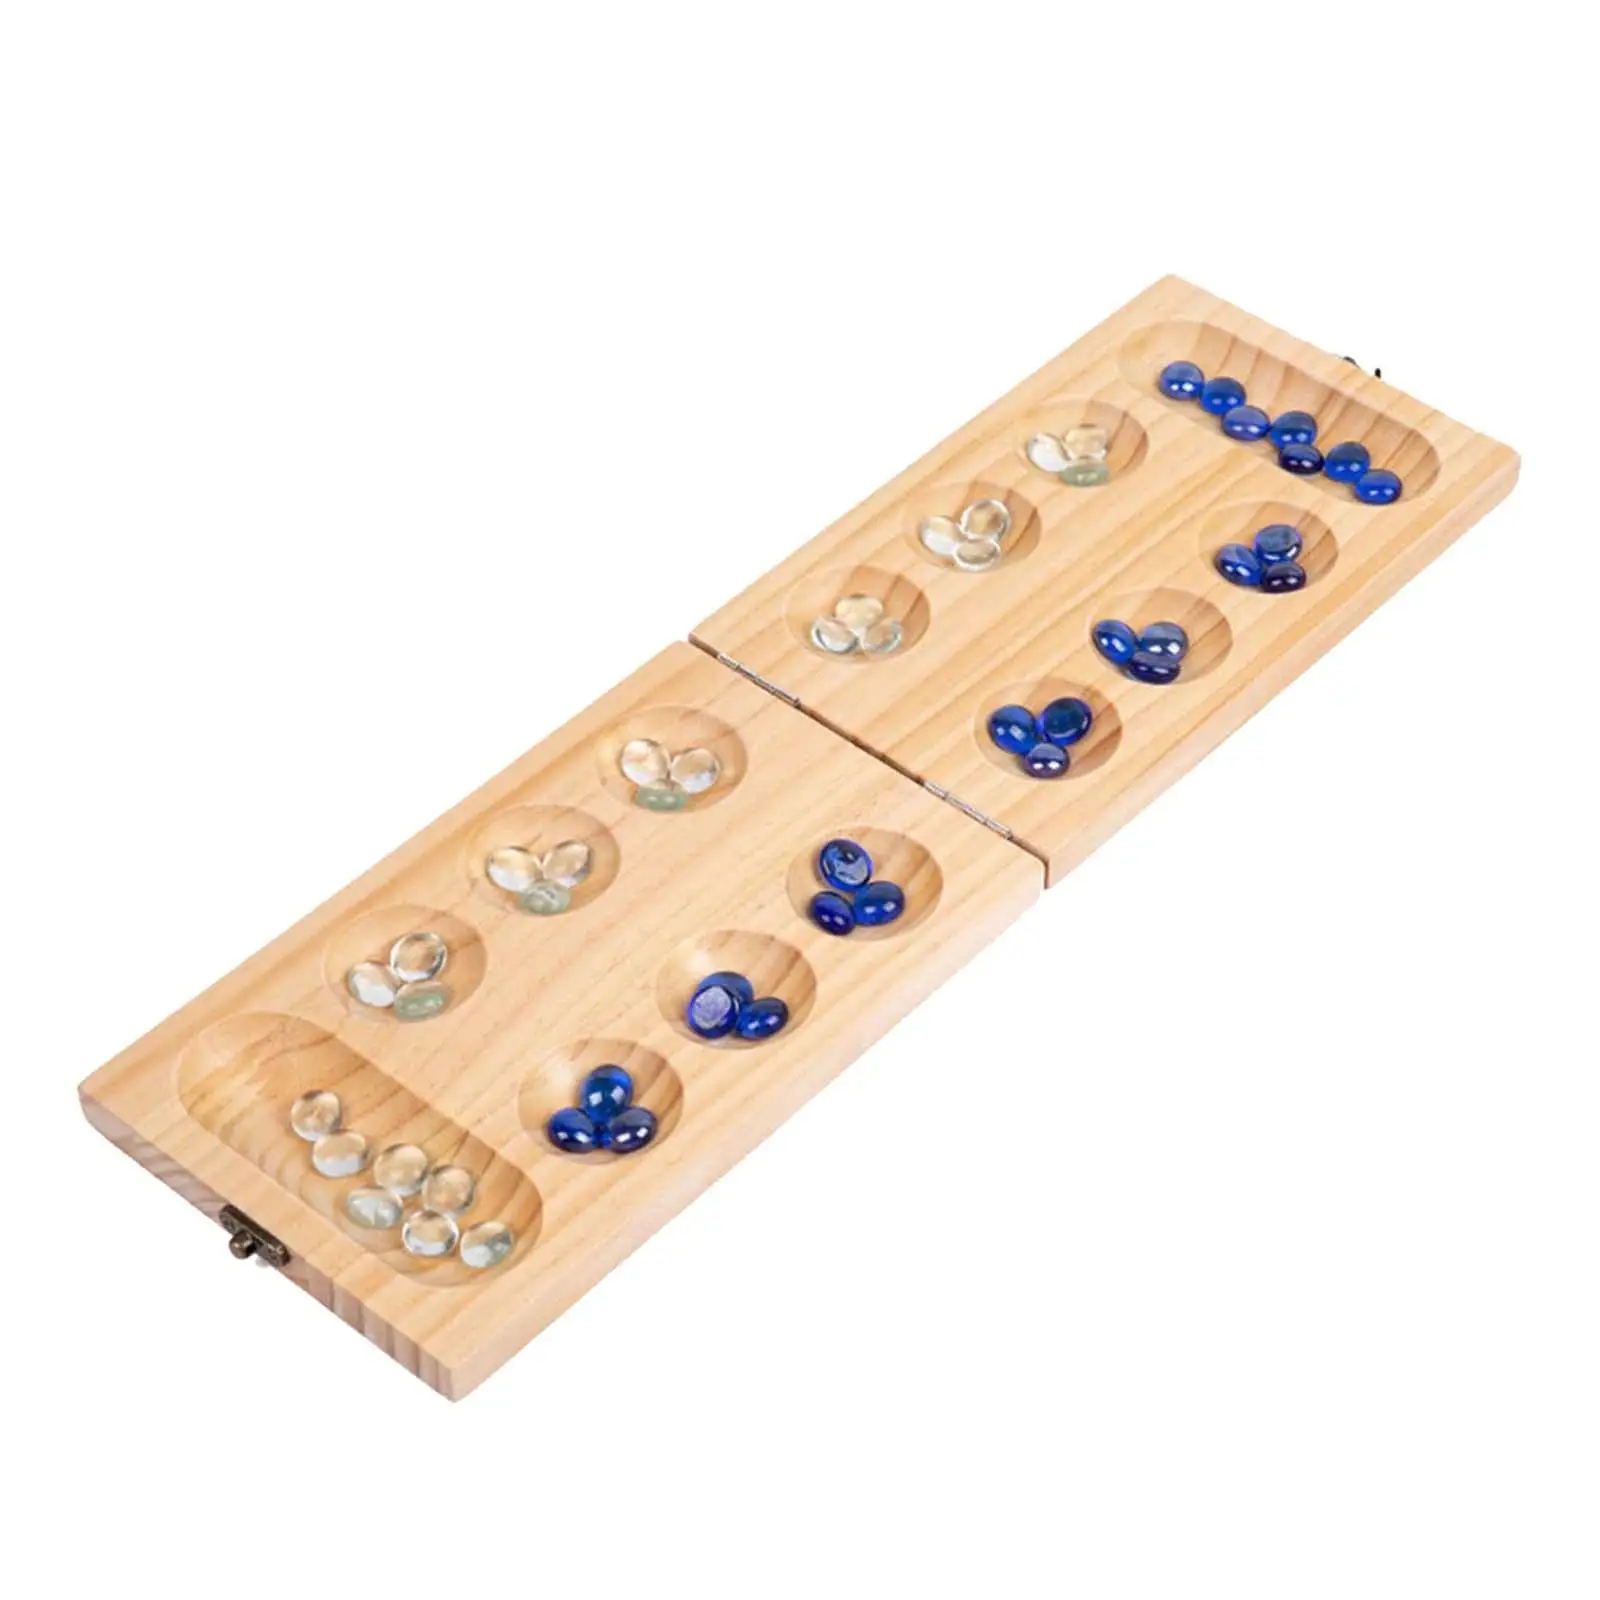 Wooden Mancala Board Game Strategy Game Children and Adults Travel Games